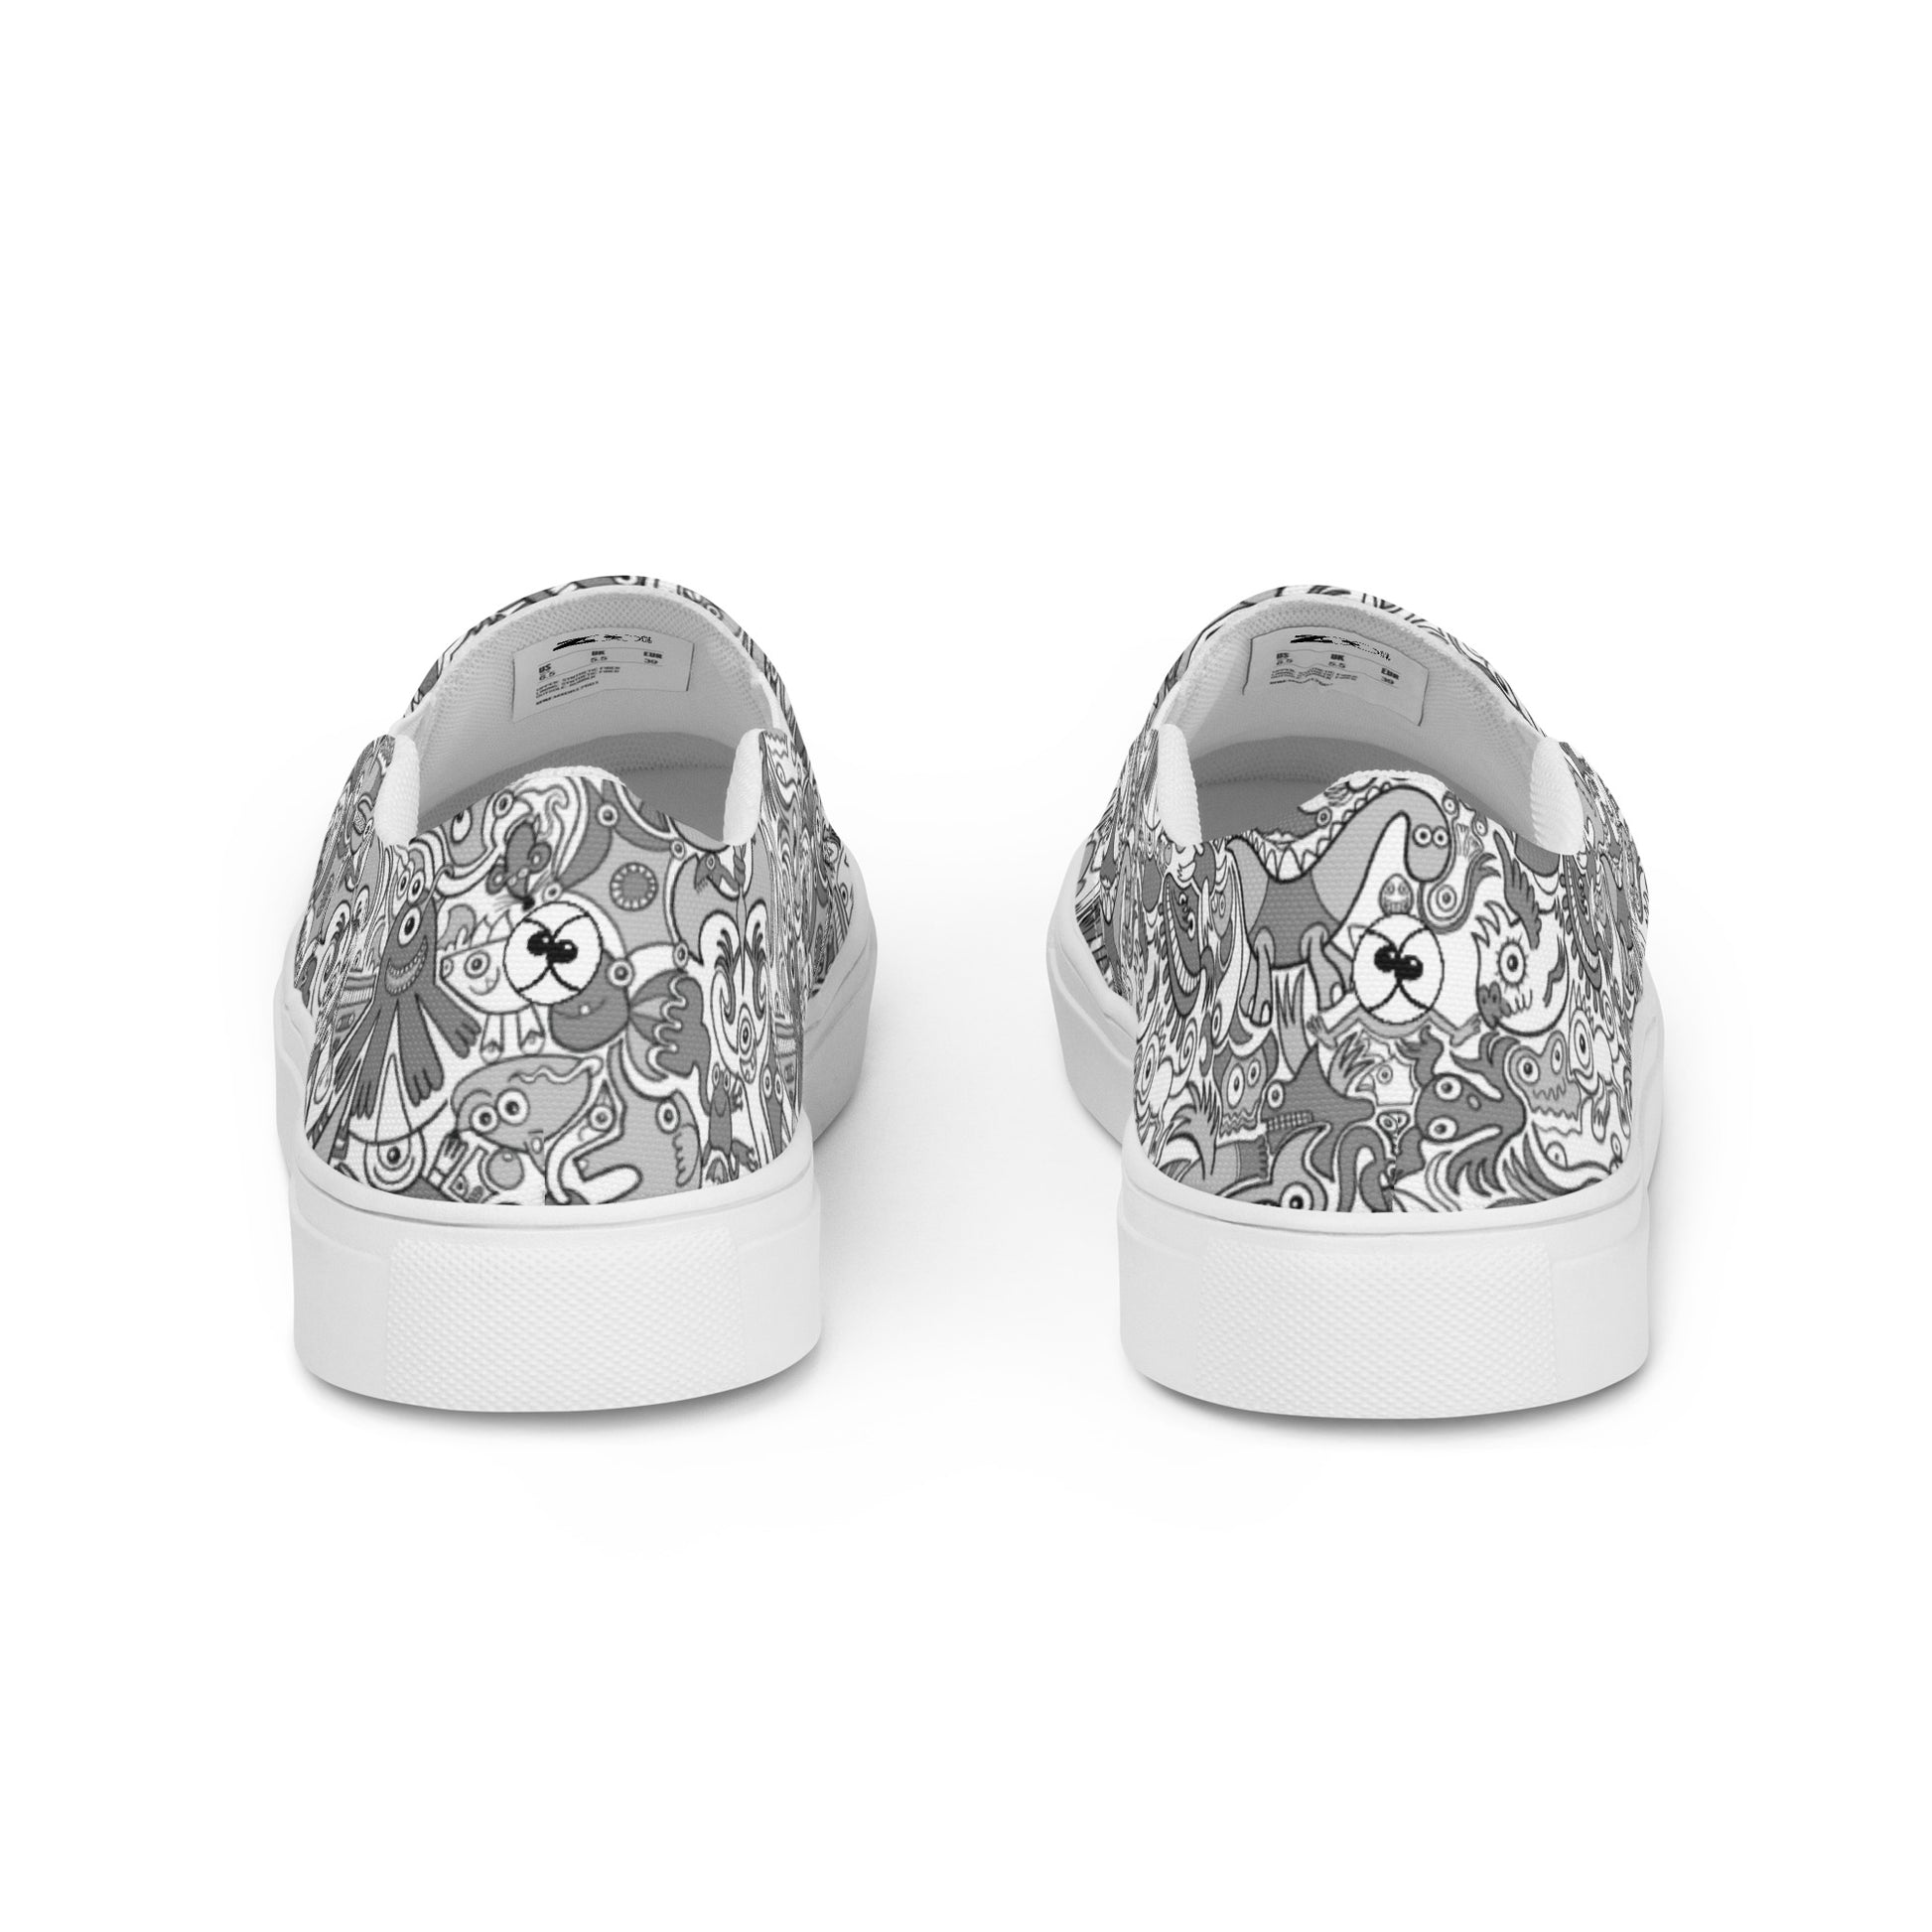 Awesome doodle creatures in a variety of tones of gray Men’s slip-on canvas shoes. Back view